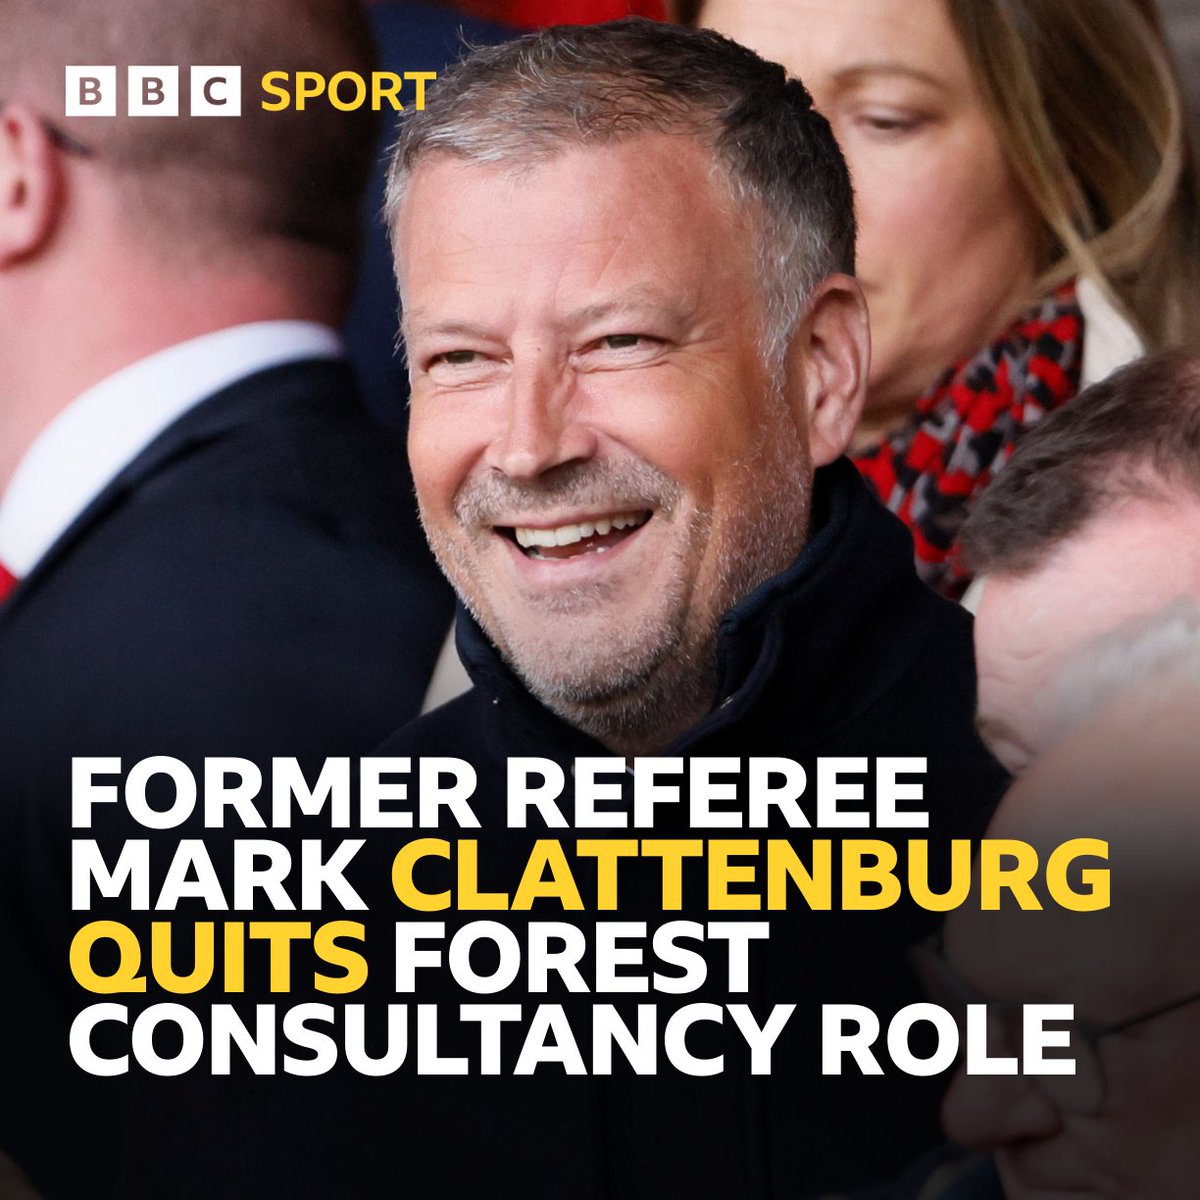 BREAKING: Mark Clattenburg quits #nffc role He said: 'It is now clear that the existence and performance of these consultancy services has caused unintended friction between NFFC and other participants, to the extent that it has become more of a hinderance than help to NFFC'